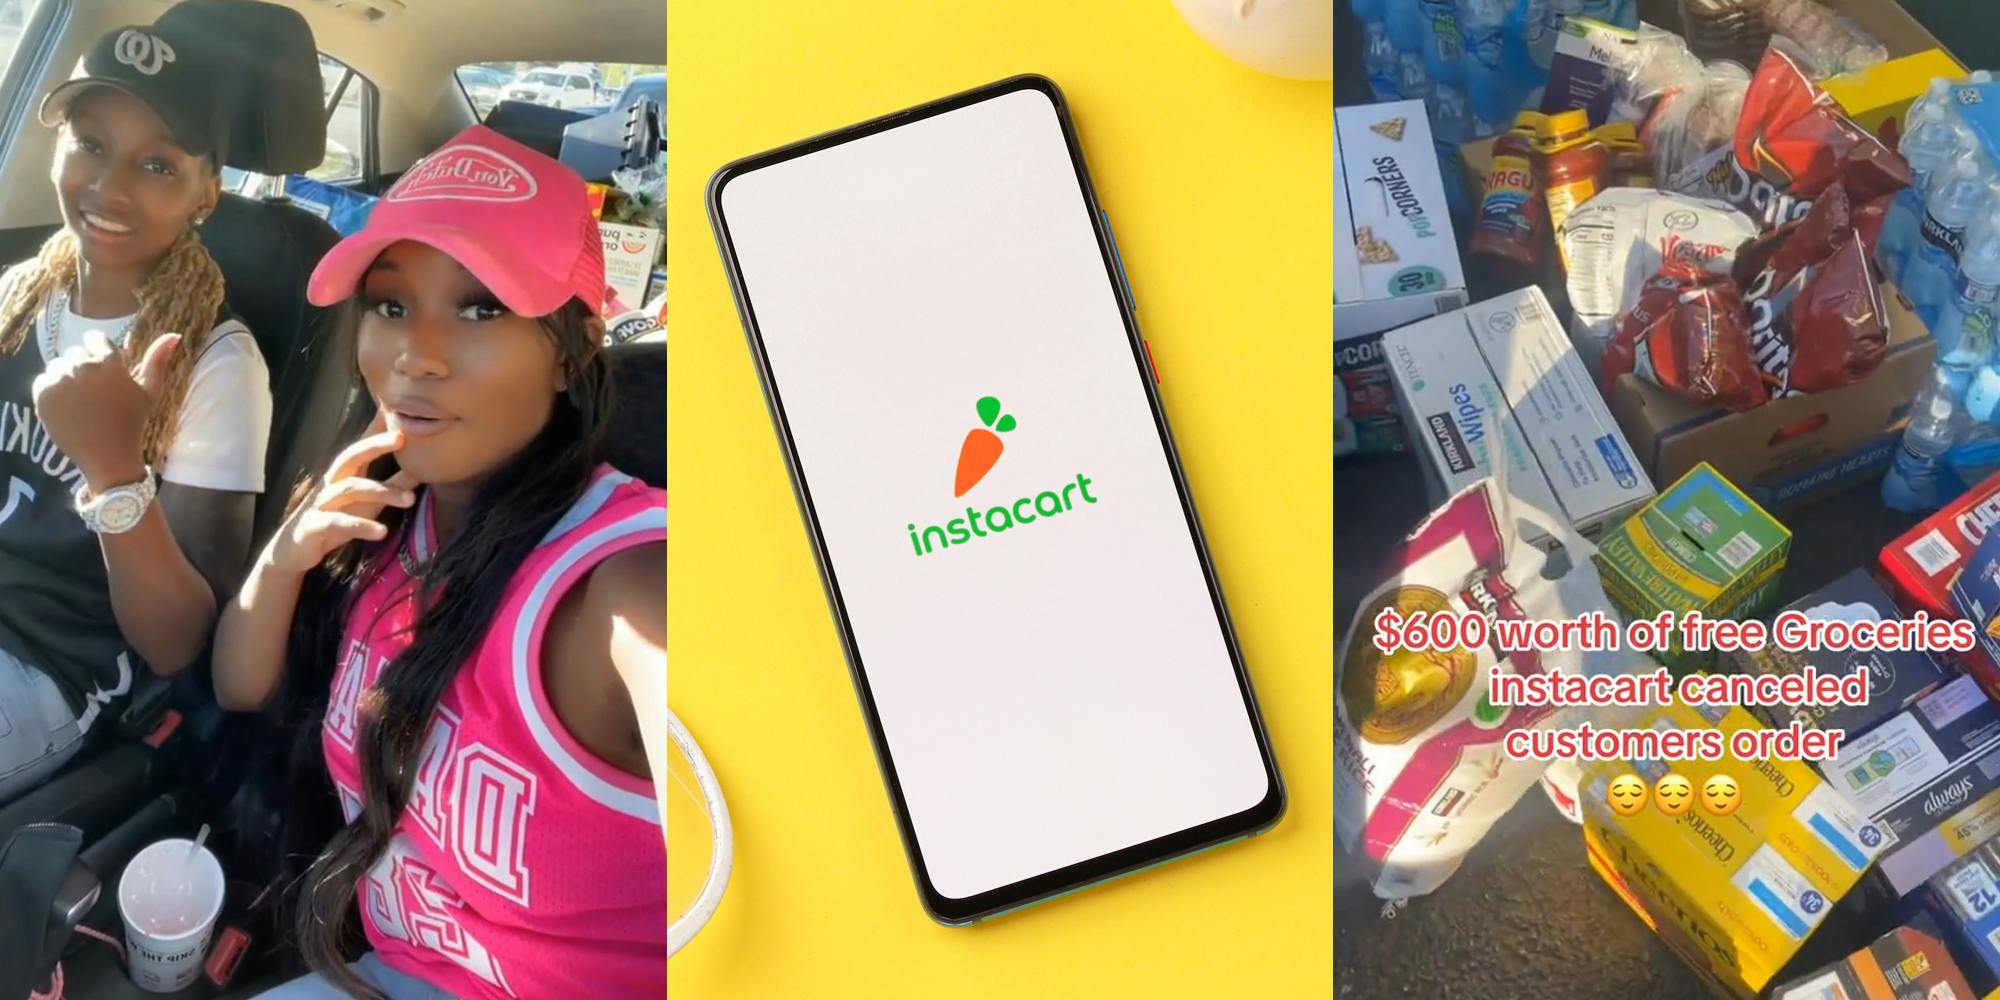 Instacart shoppers speaking in the car (l) Instacart app open on phone in front of yellow background (c) groceries outside with caption "$600 worth of free groceries instacart canceled customers order"